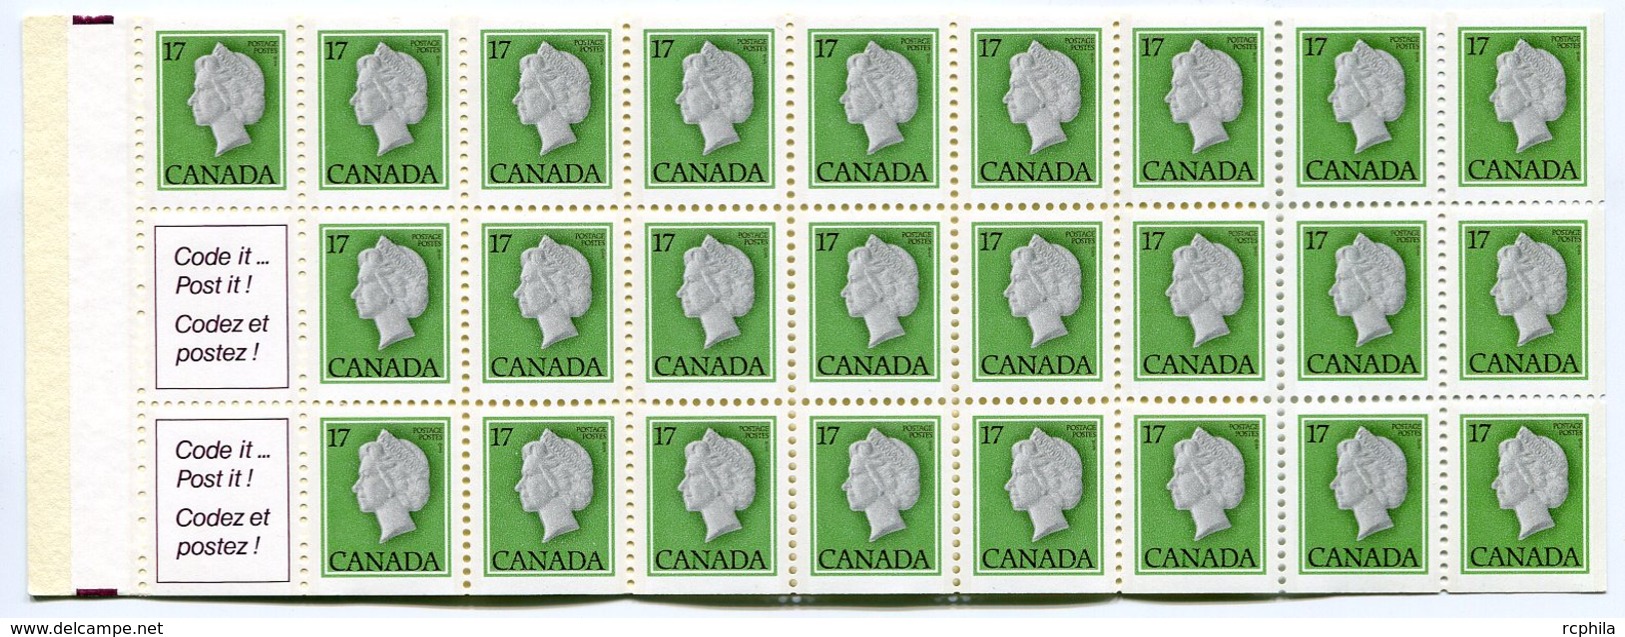 RC 15932 CANADA BK81 PARLIAMENT ISSUE CARNET COMPLET BOOKLET MNH NEUF ** - Volledige Boekjes